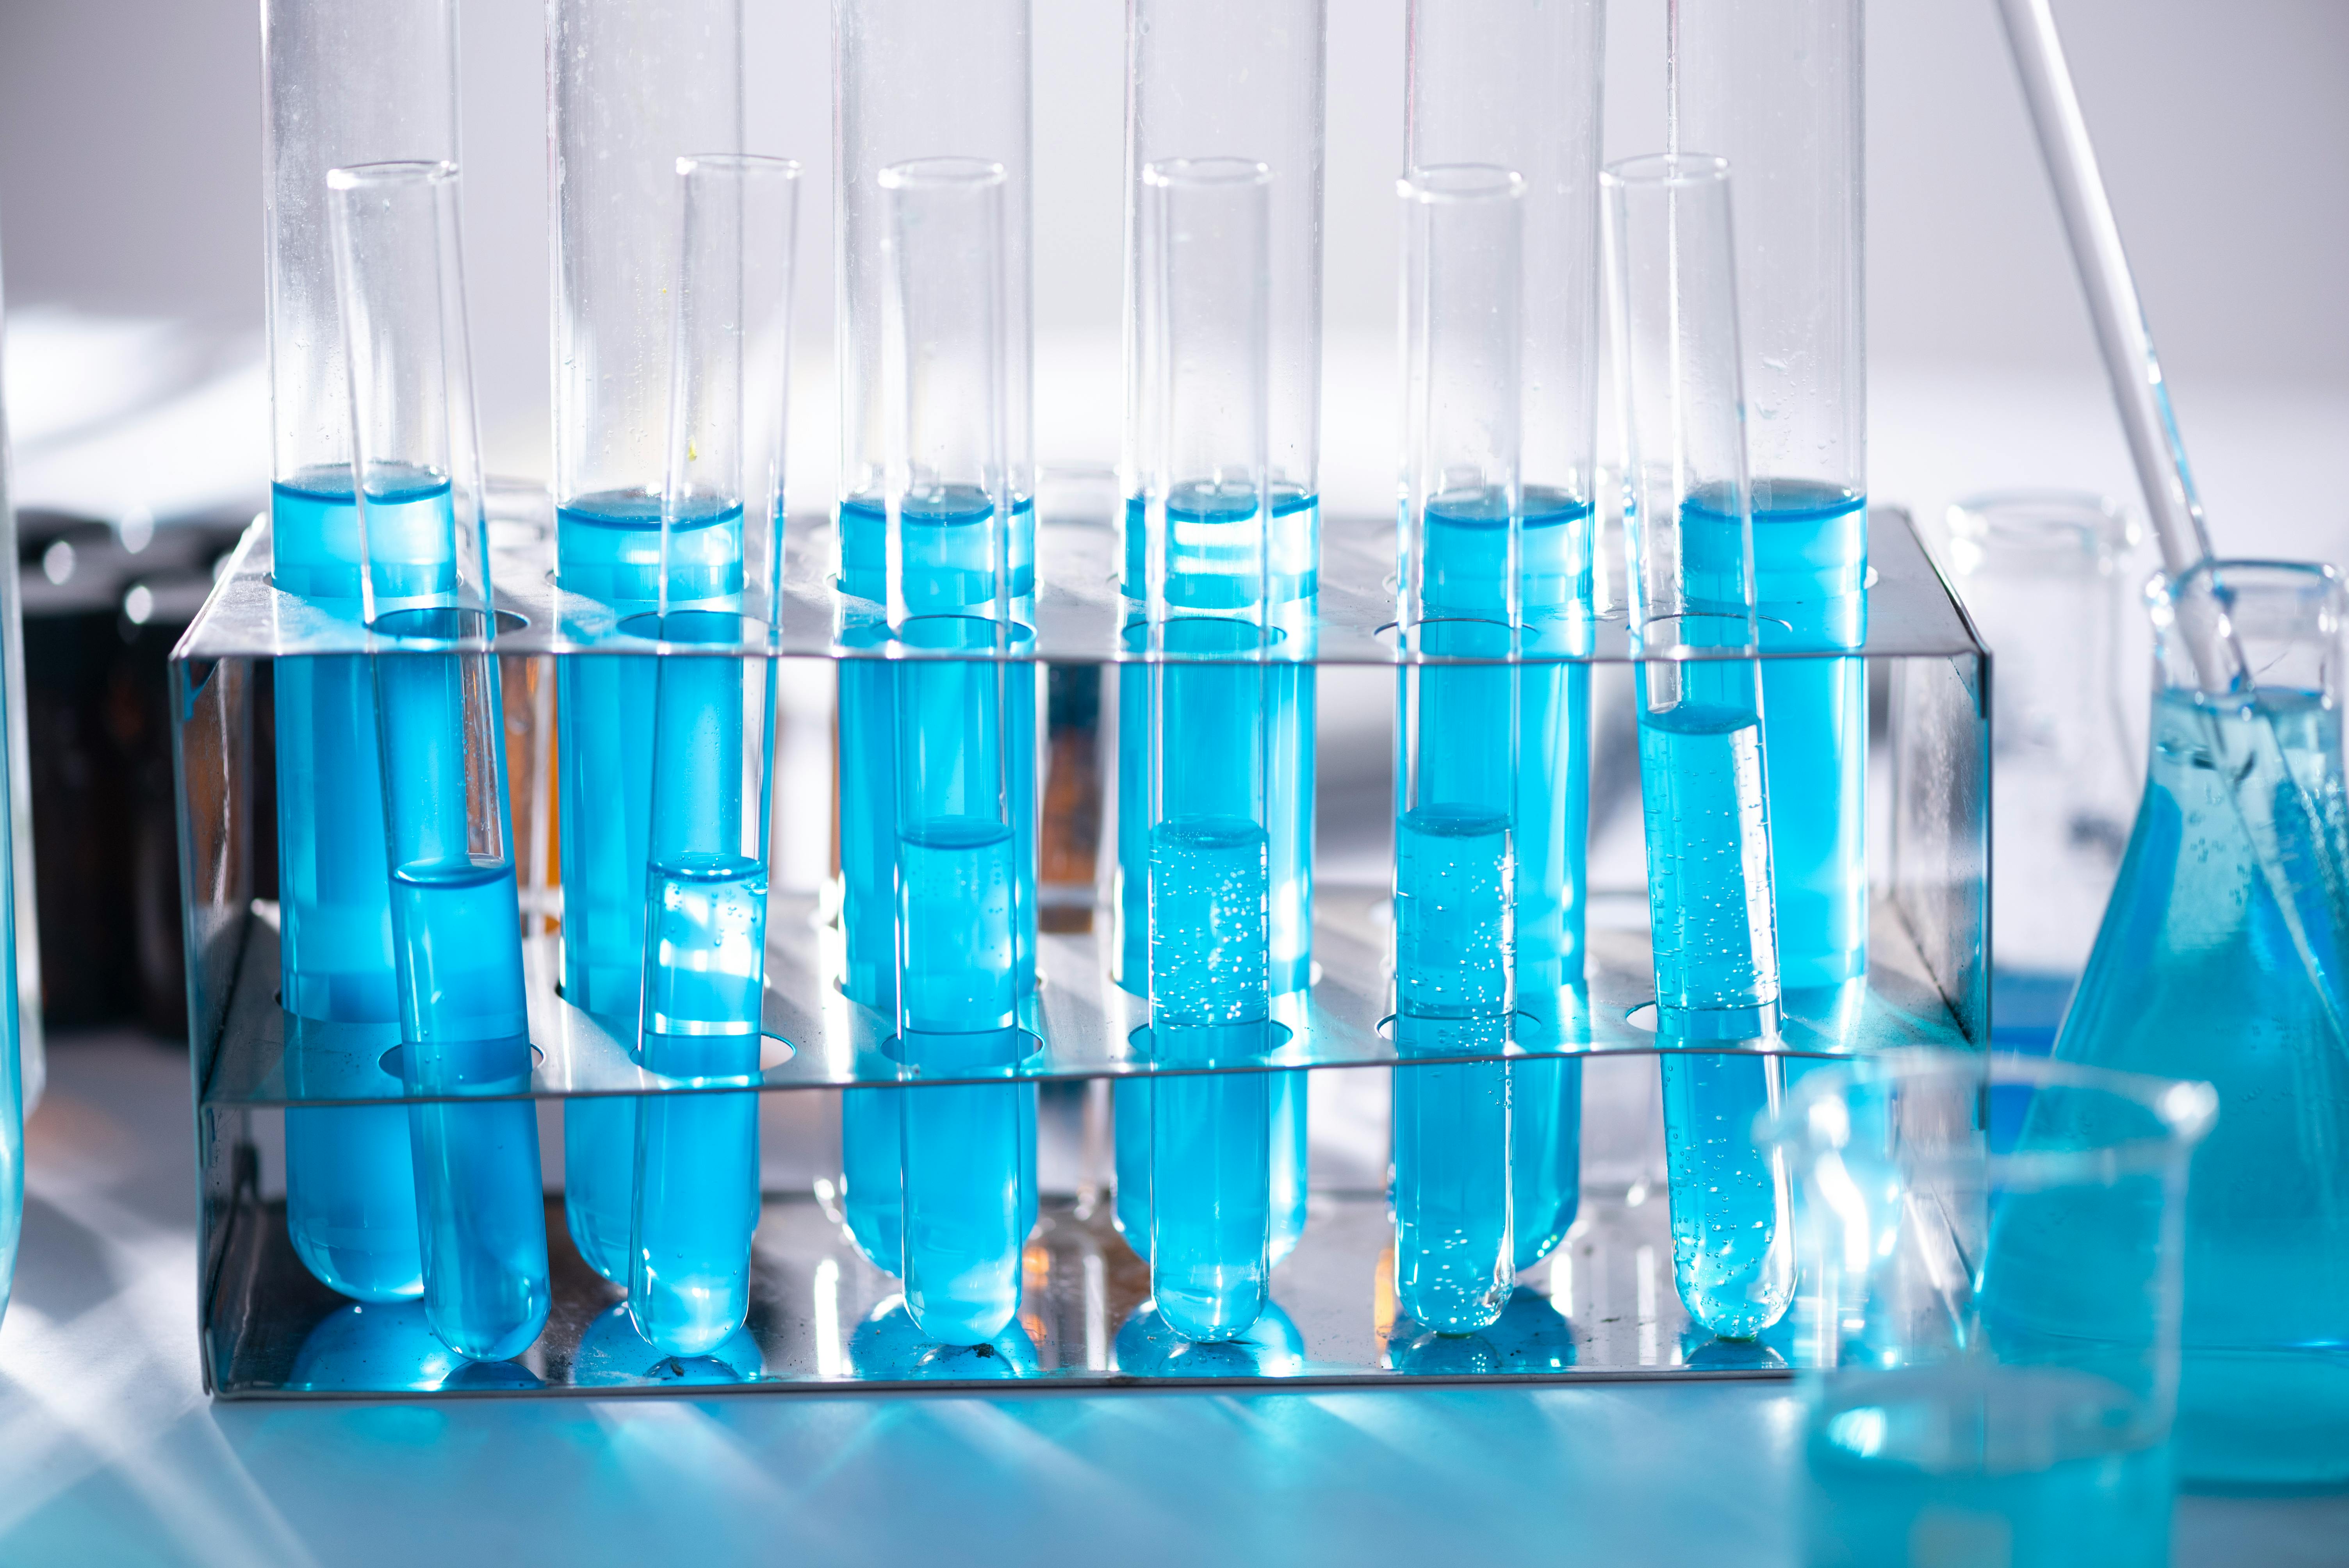 Test tubes with liquid | Source: Pexels